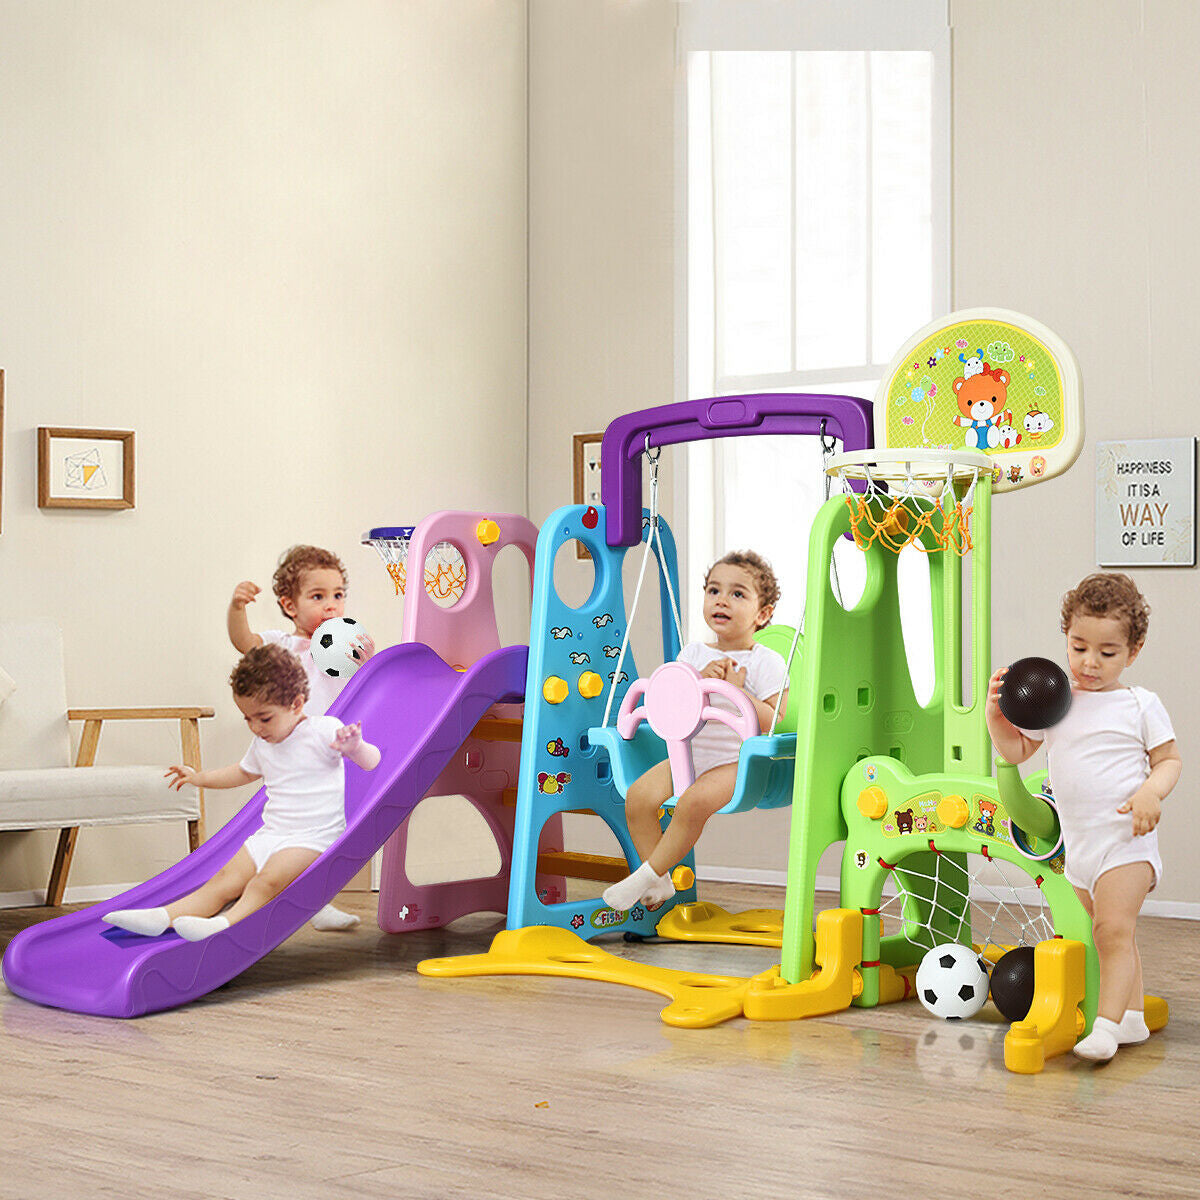 Reliable Sturdy Construction: The playset is made of safe and non-toxic HDPE material, certified with ASTM and CPC. The wide rectangular base can be filled with sand or water for added stability and load-bearing capacity.